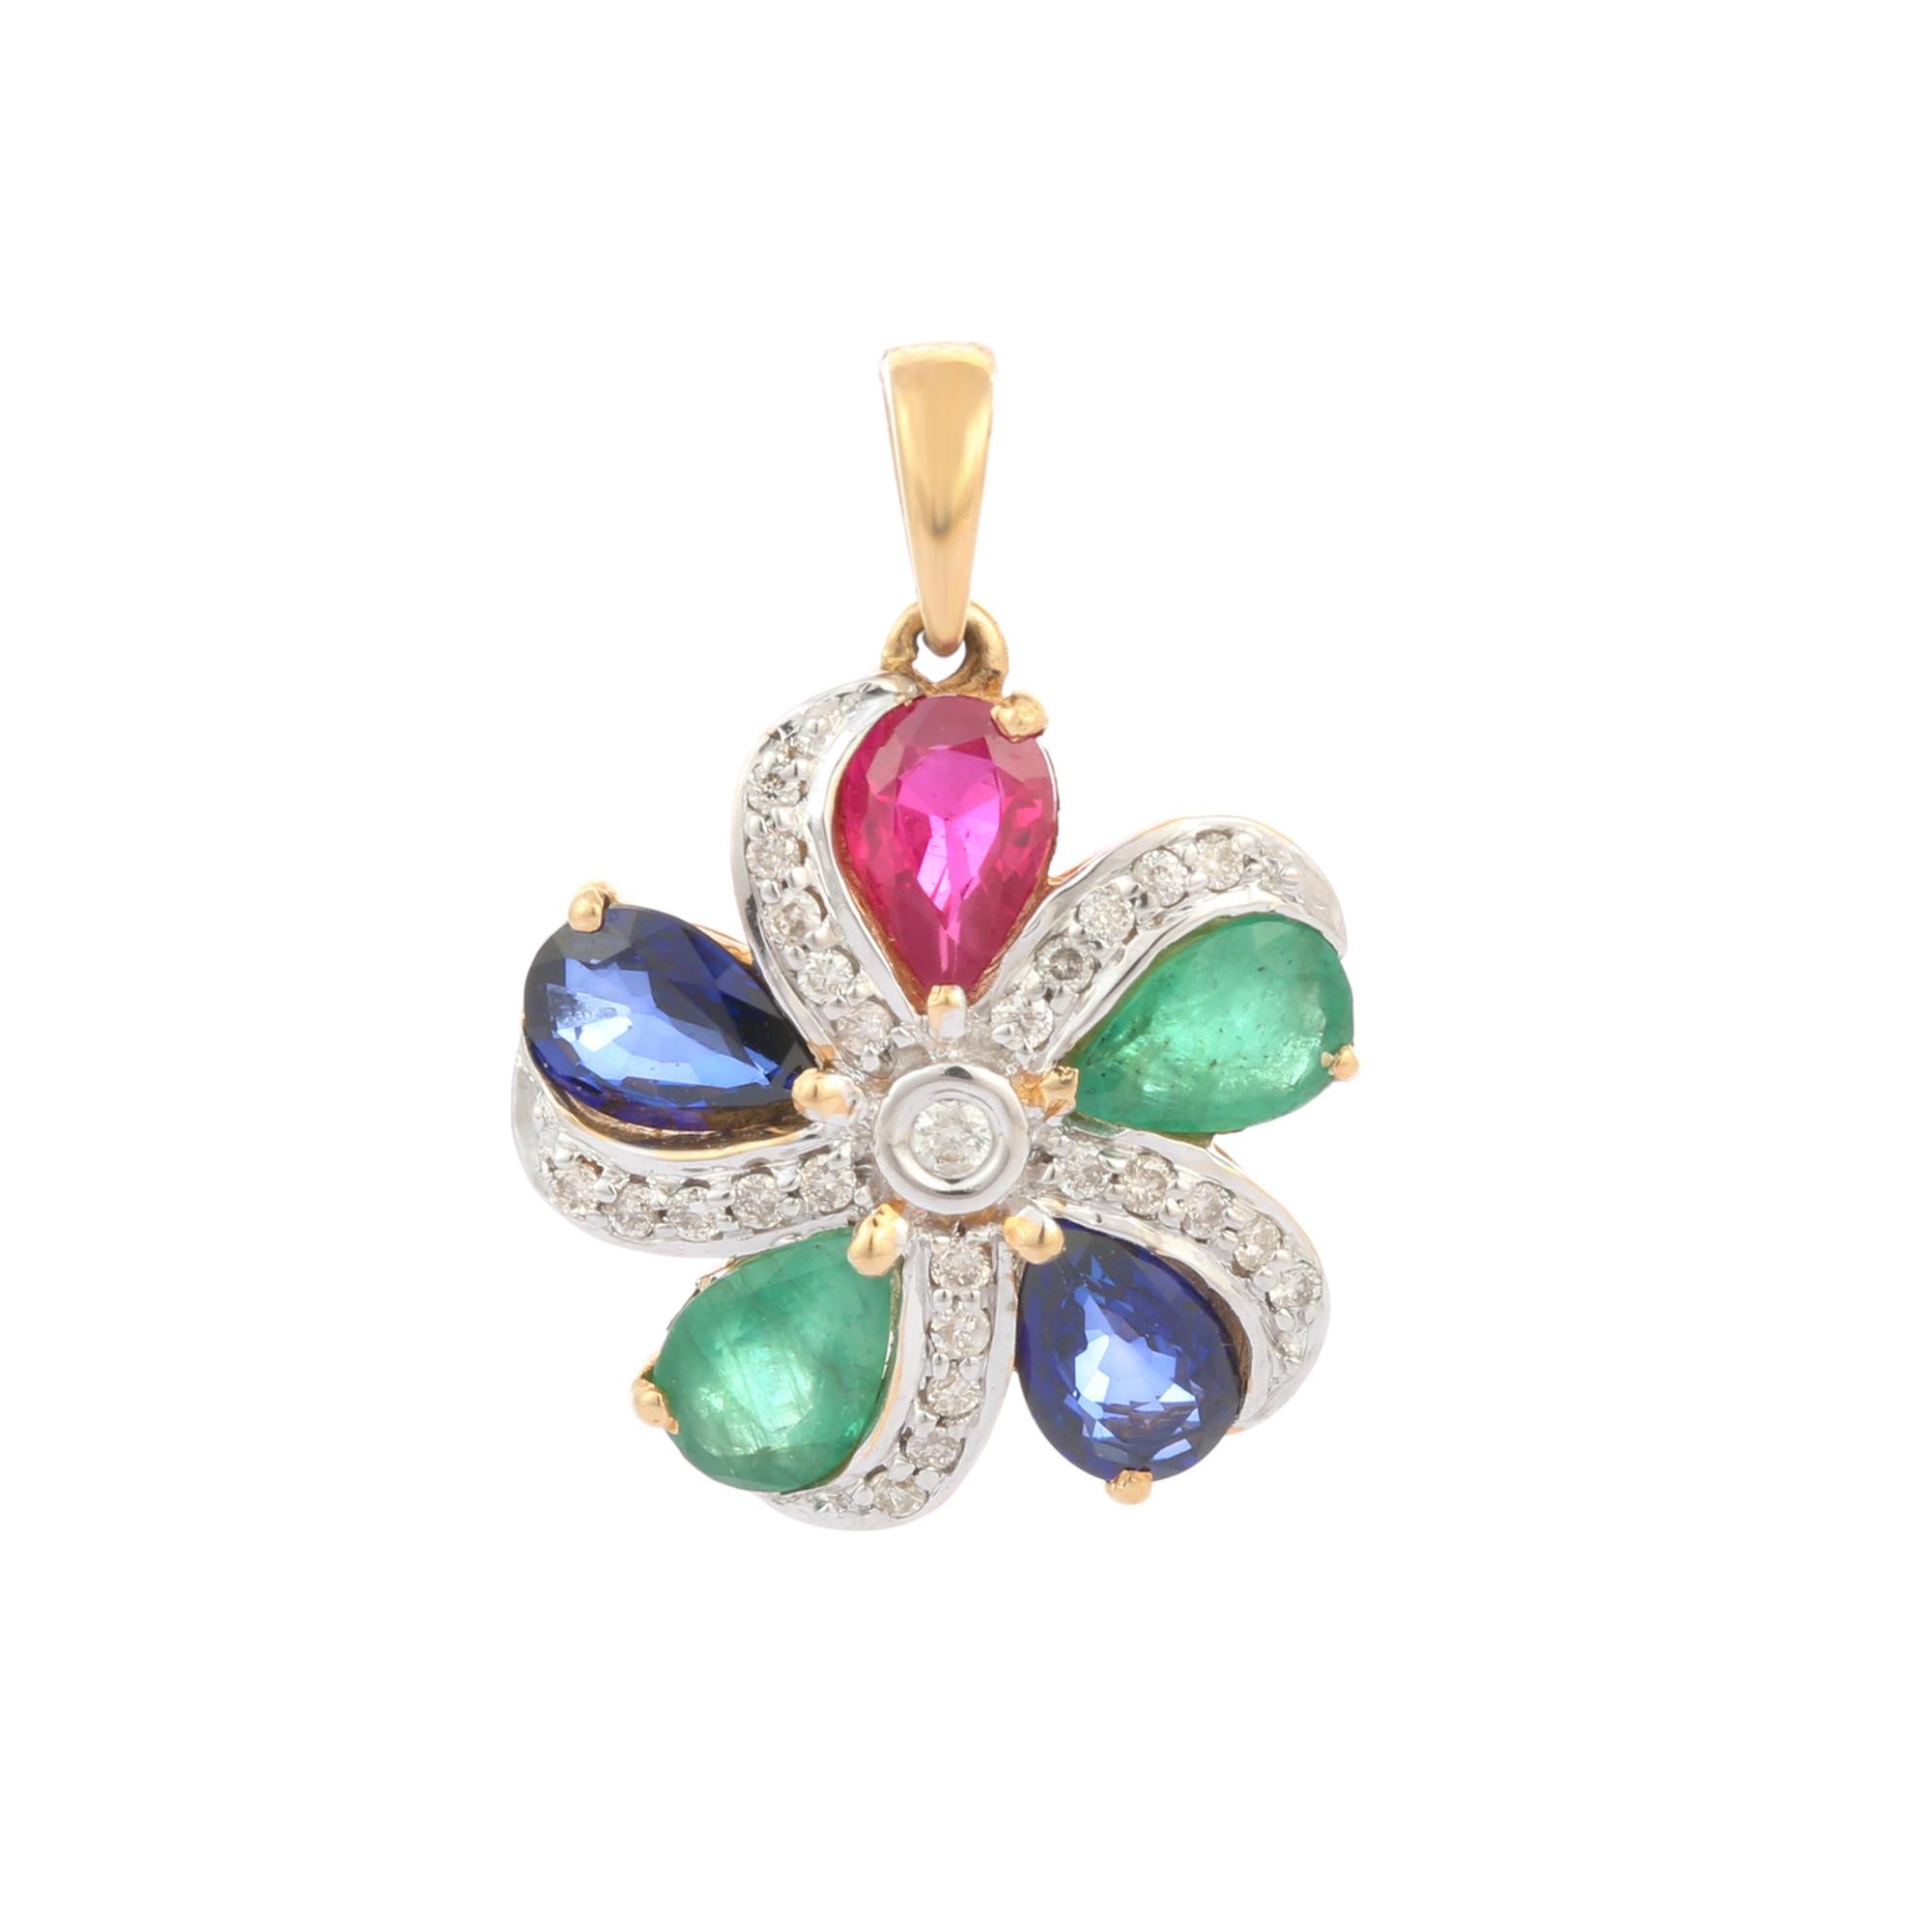 Bespoke Emerald, Ruby, Sapphire and Diamond Flower Pendant in 18k Yellow Gold In New Condition For Sale In Houston, TX